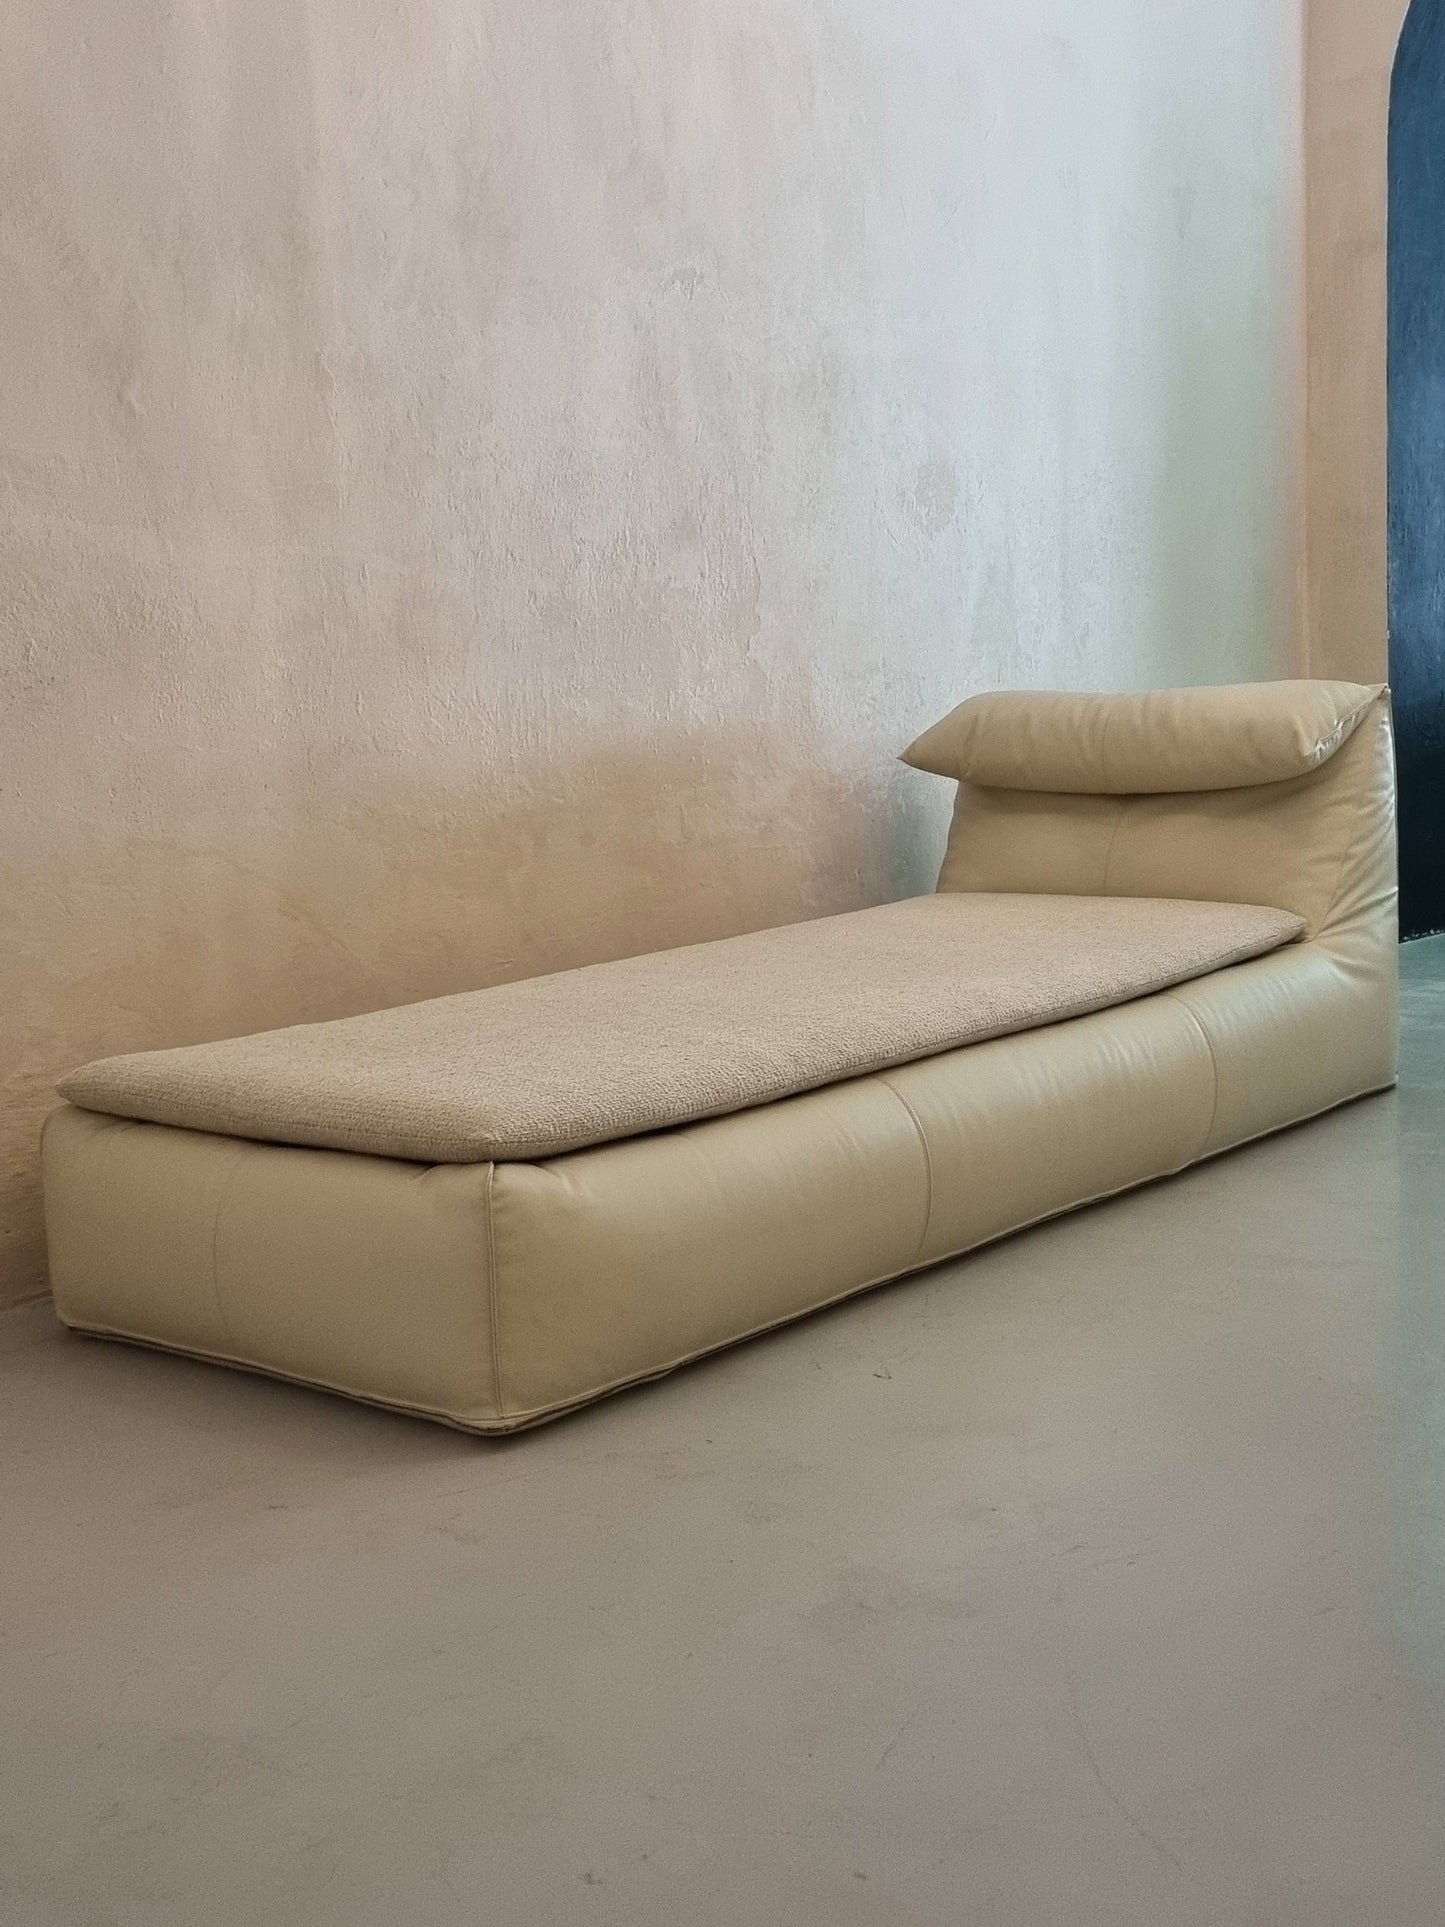 Le Bambole Daybed by Mario Bellini Beds